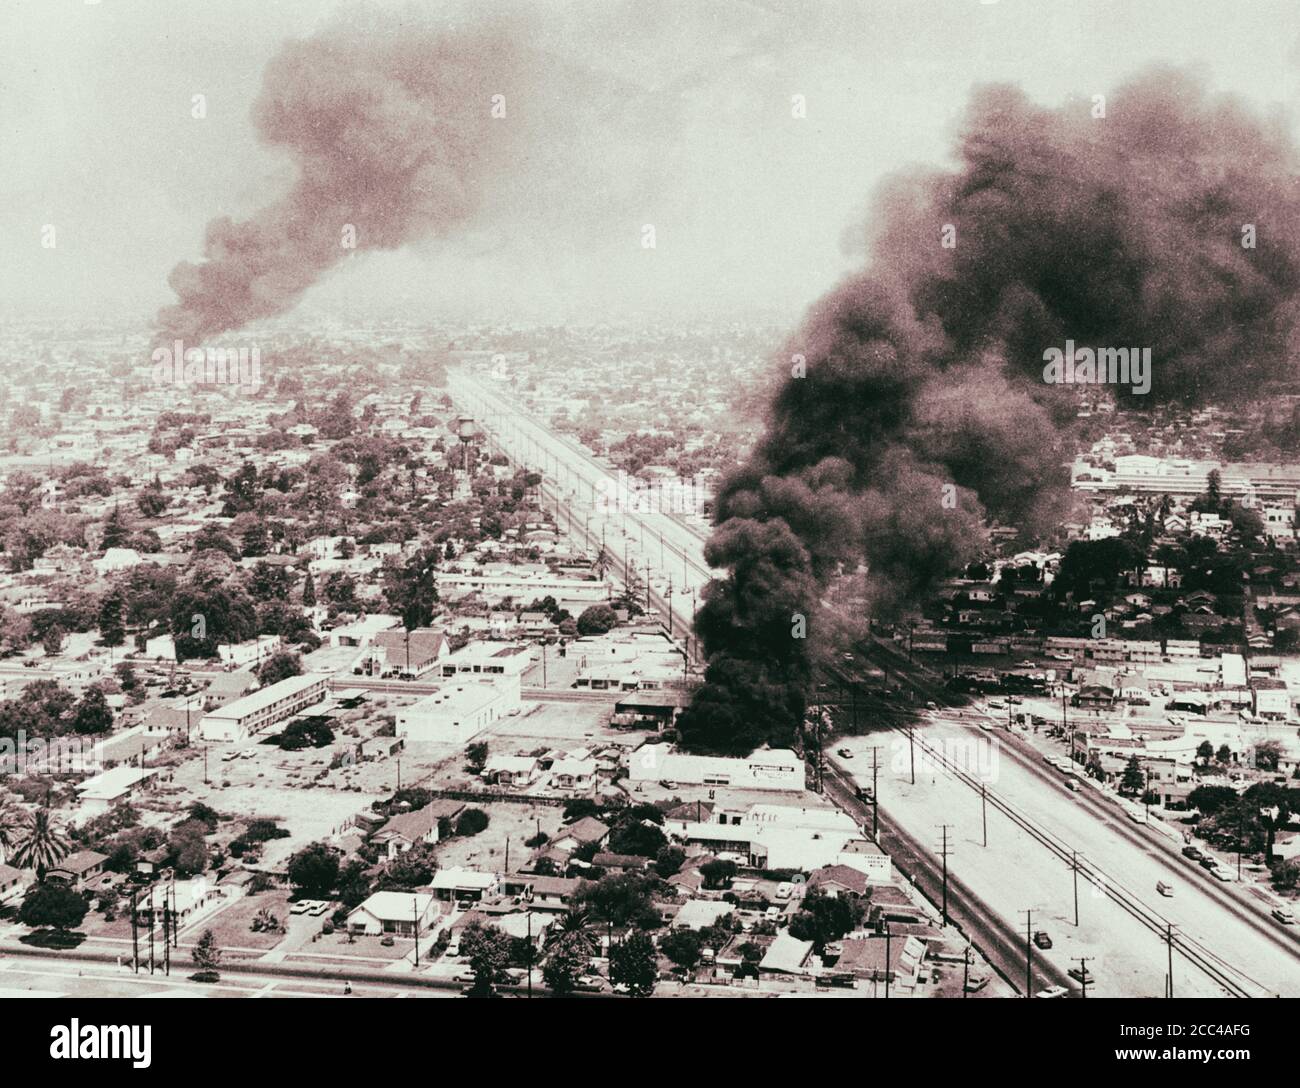 The Watts riots, sometimes referred to as the Watts Rebellion, took place in the Watts neighborhood and its surrounding areas of Los Angeles from Augu Stock Photo